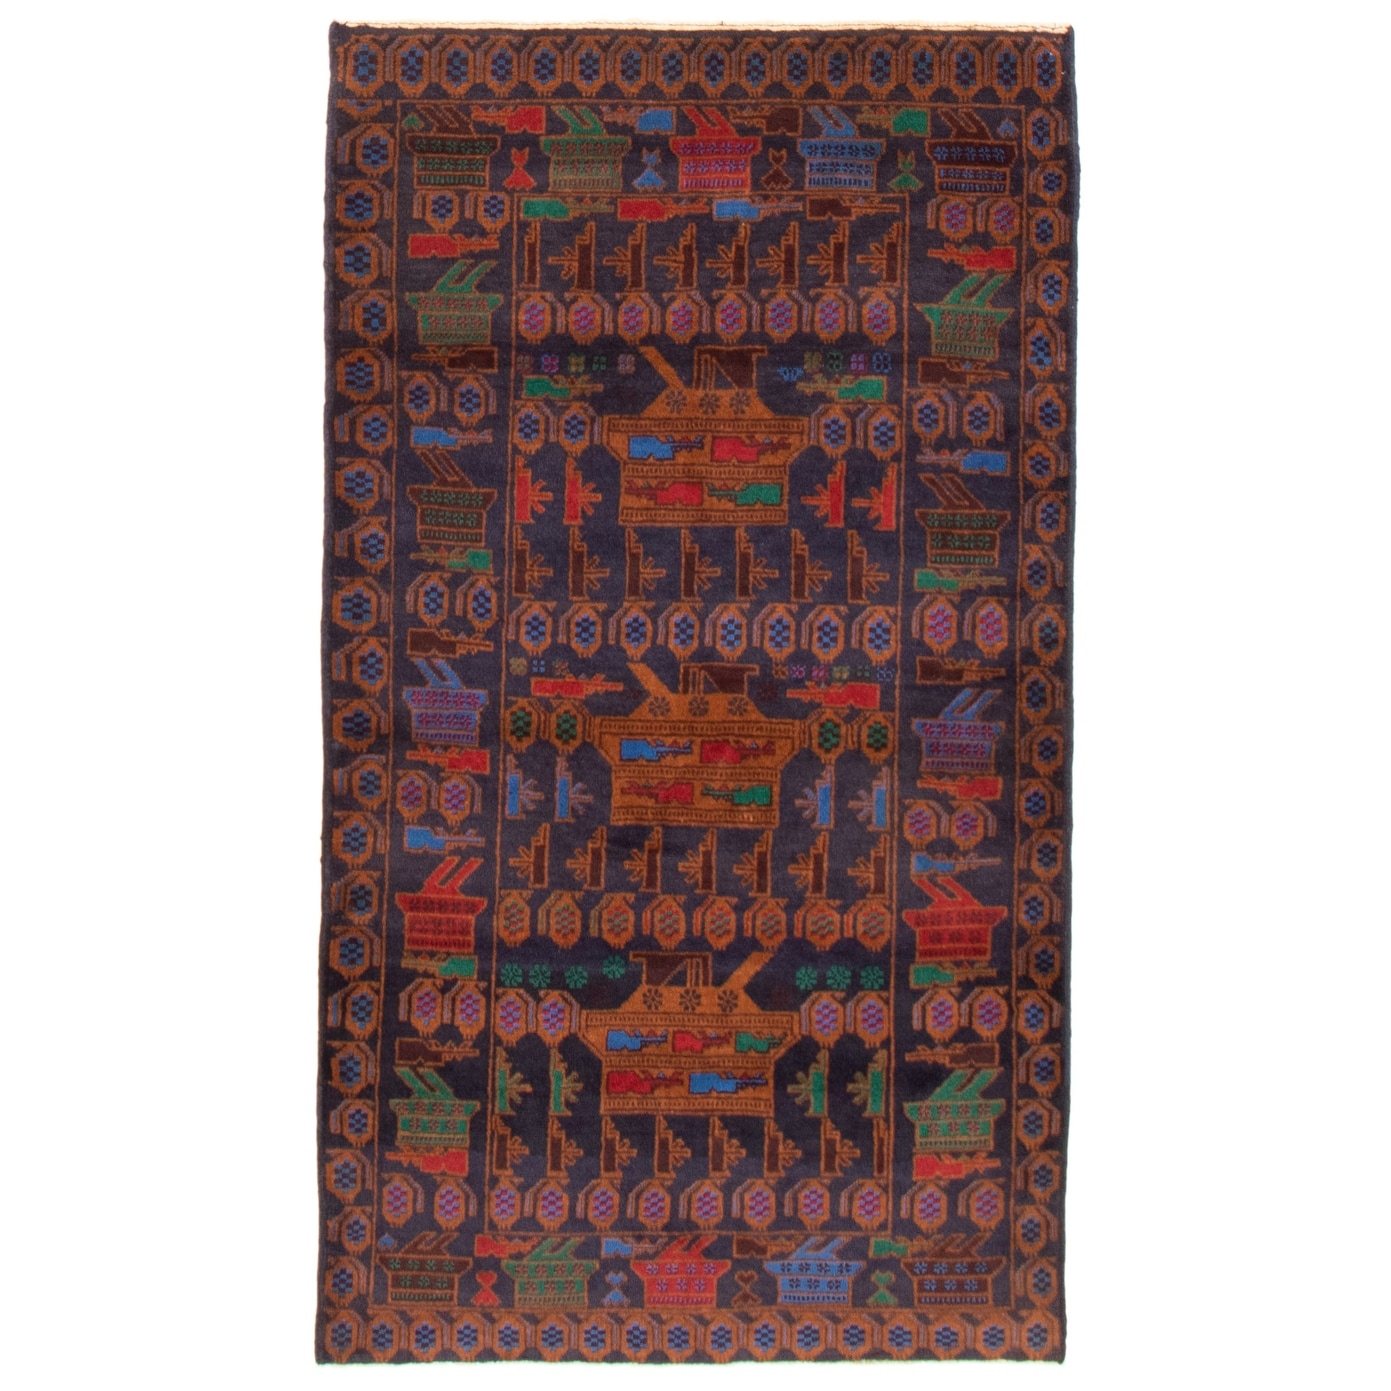 Bedroom Rare War Bordered Blue Rug 3'7 x 6'3 357462 eCarpet Gallery Area Rug for Living Room Hand-Knotted Wool Rug